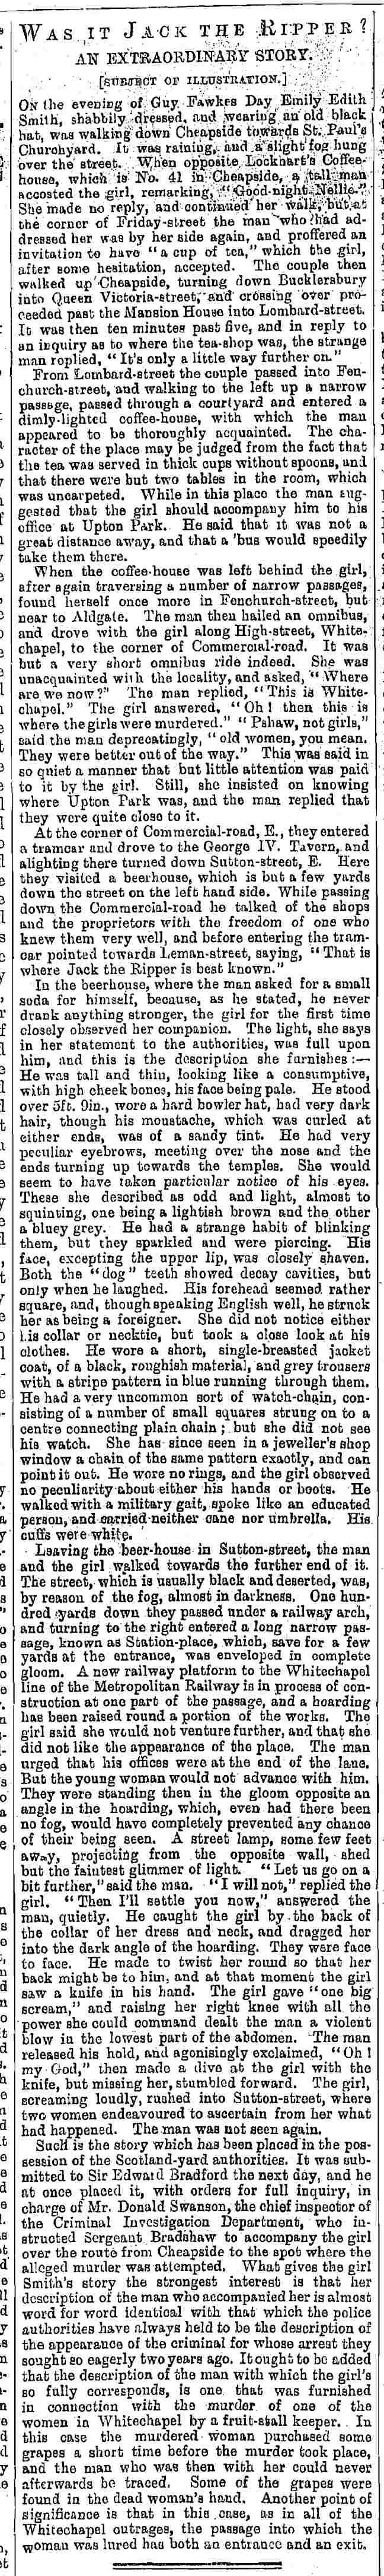 Illustrated-Police-News-Jack-the-Ripper-Article-March-12-1889